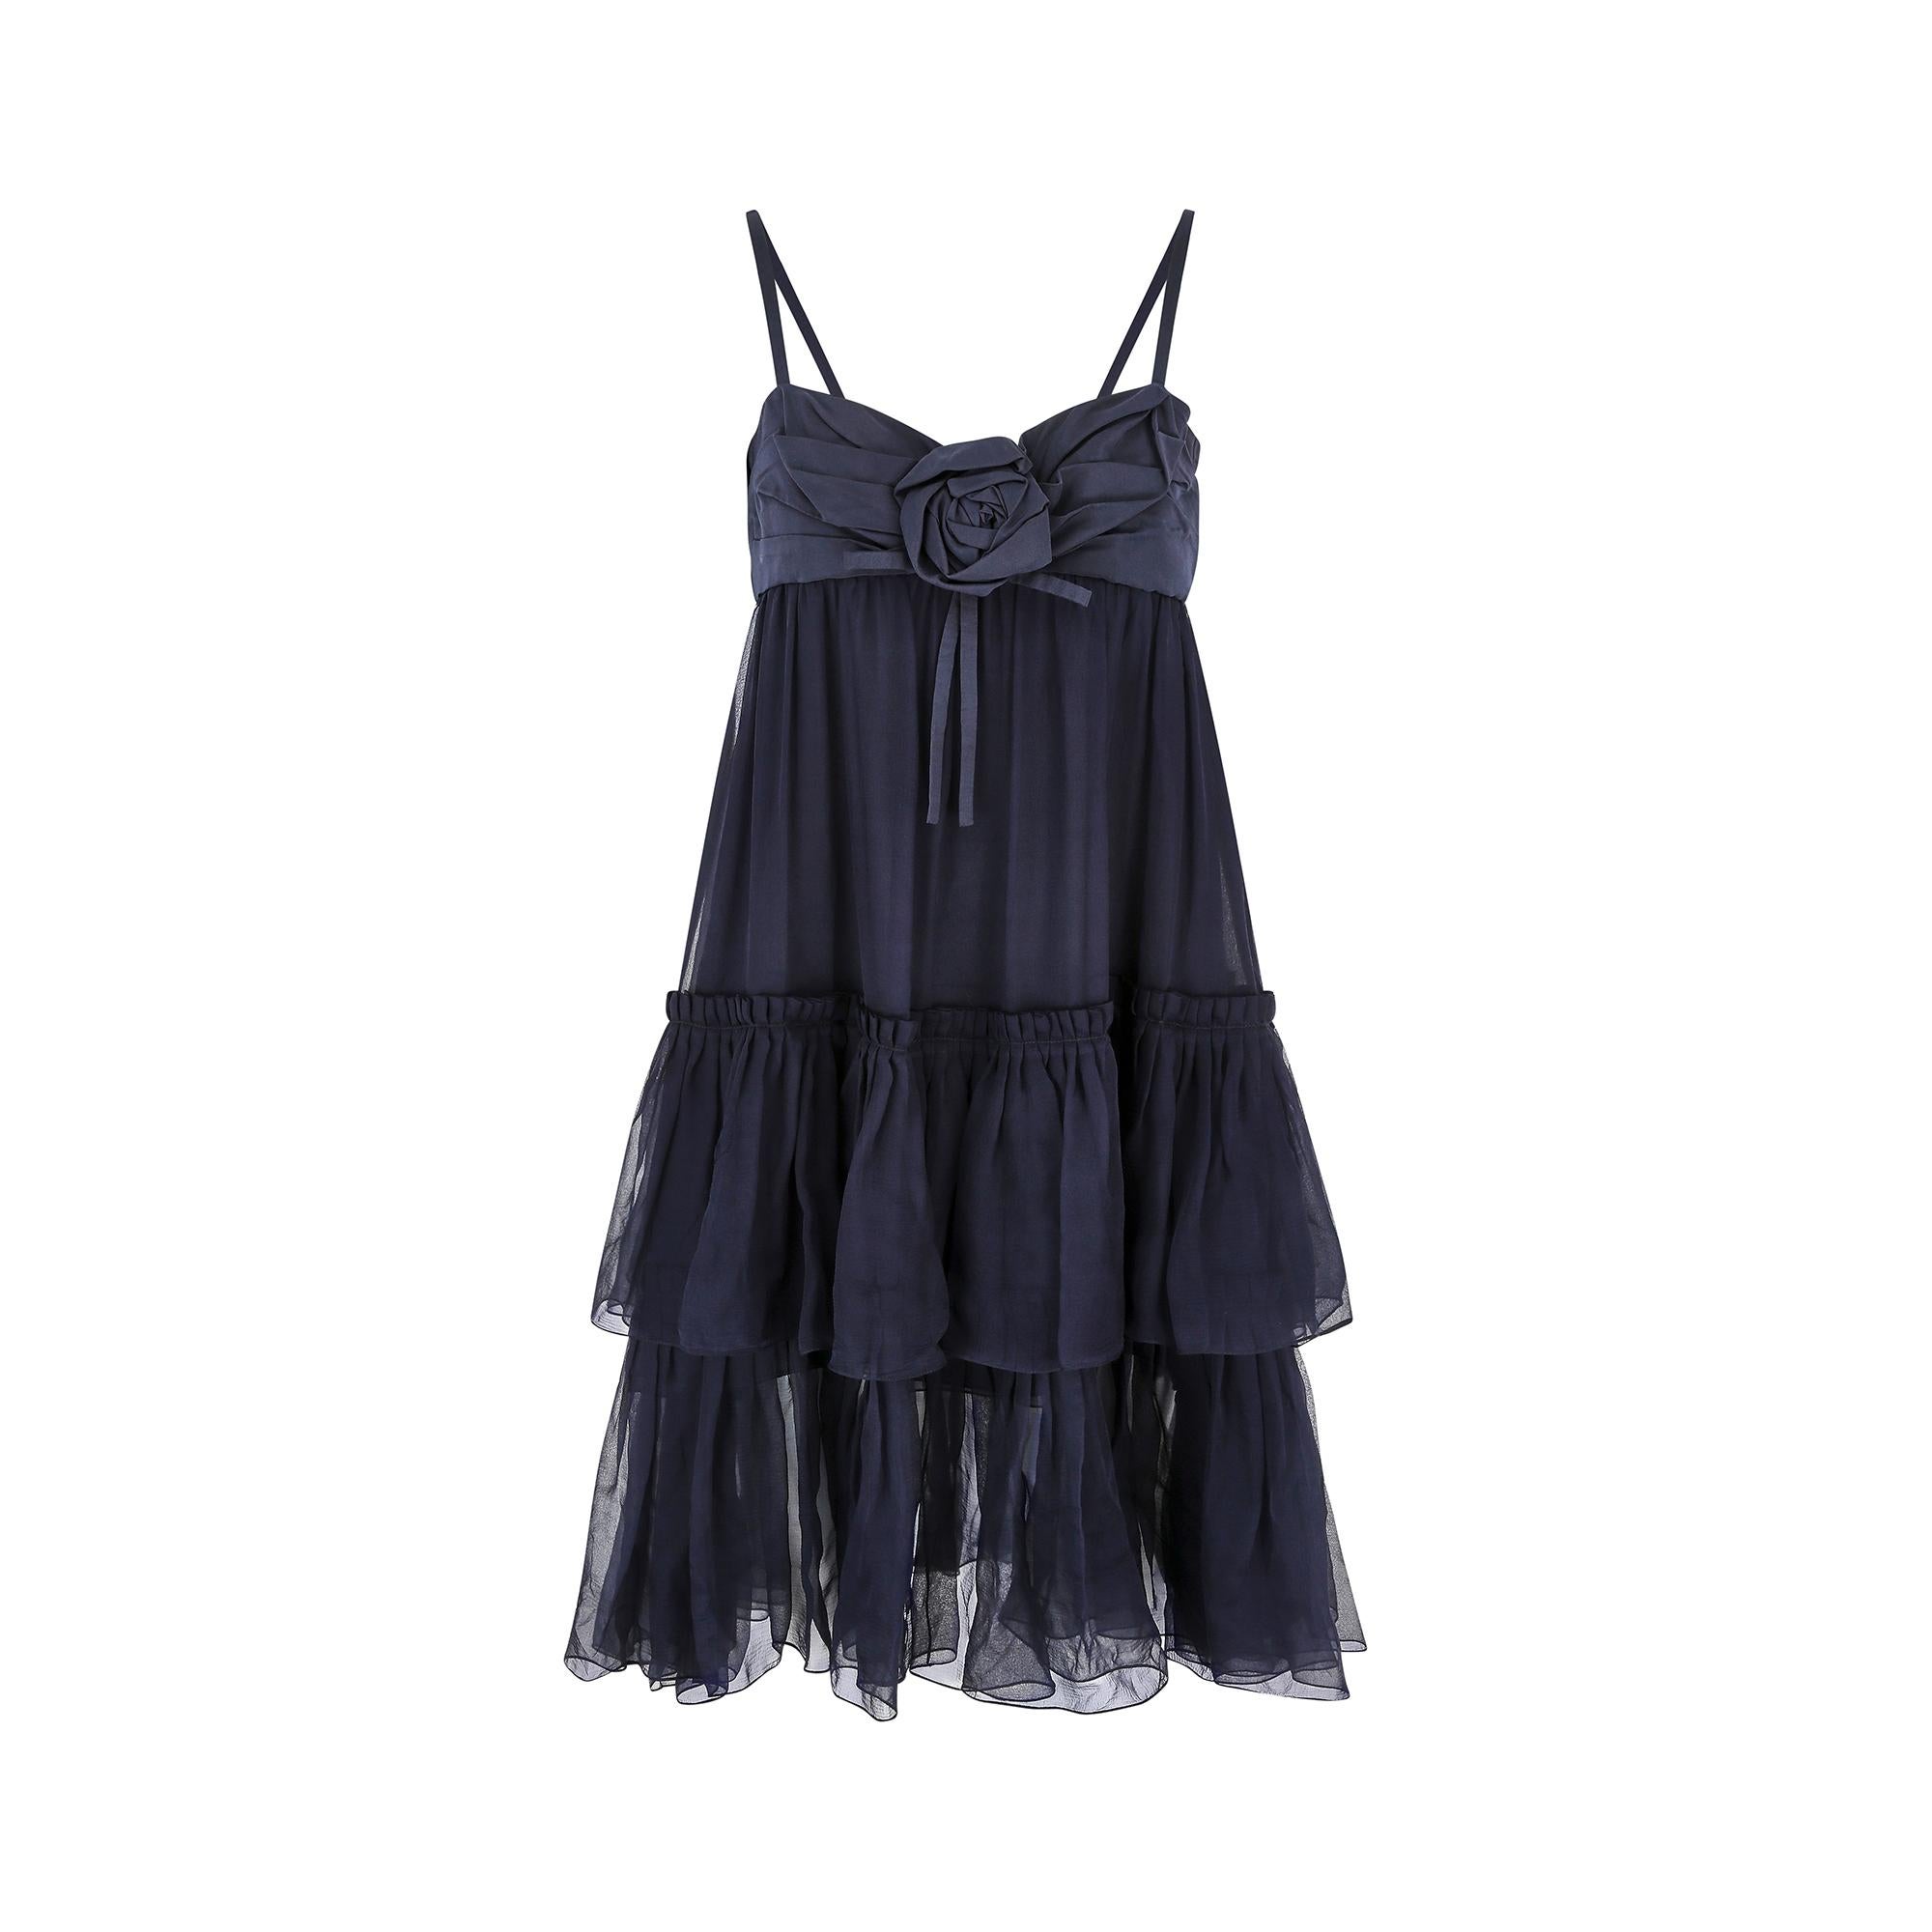 2008 autumn winter collection babydoll dress by Christian Dior, crafted in a delicate deep navy blue chiffon silk. It features a pleated silk bodice with thin shoulder straps, a sweetheart neckline and central rose detail. The rear of the dress